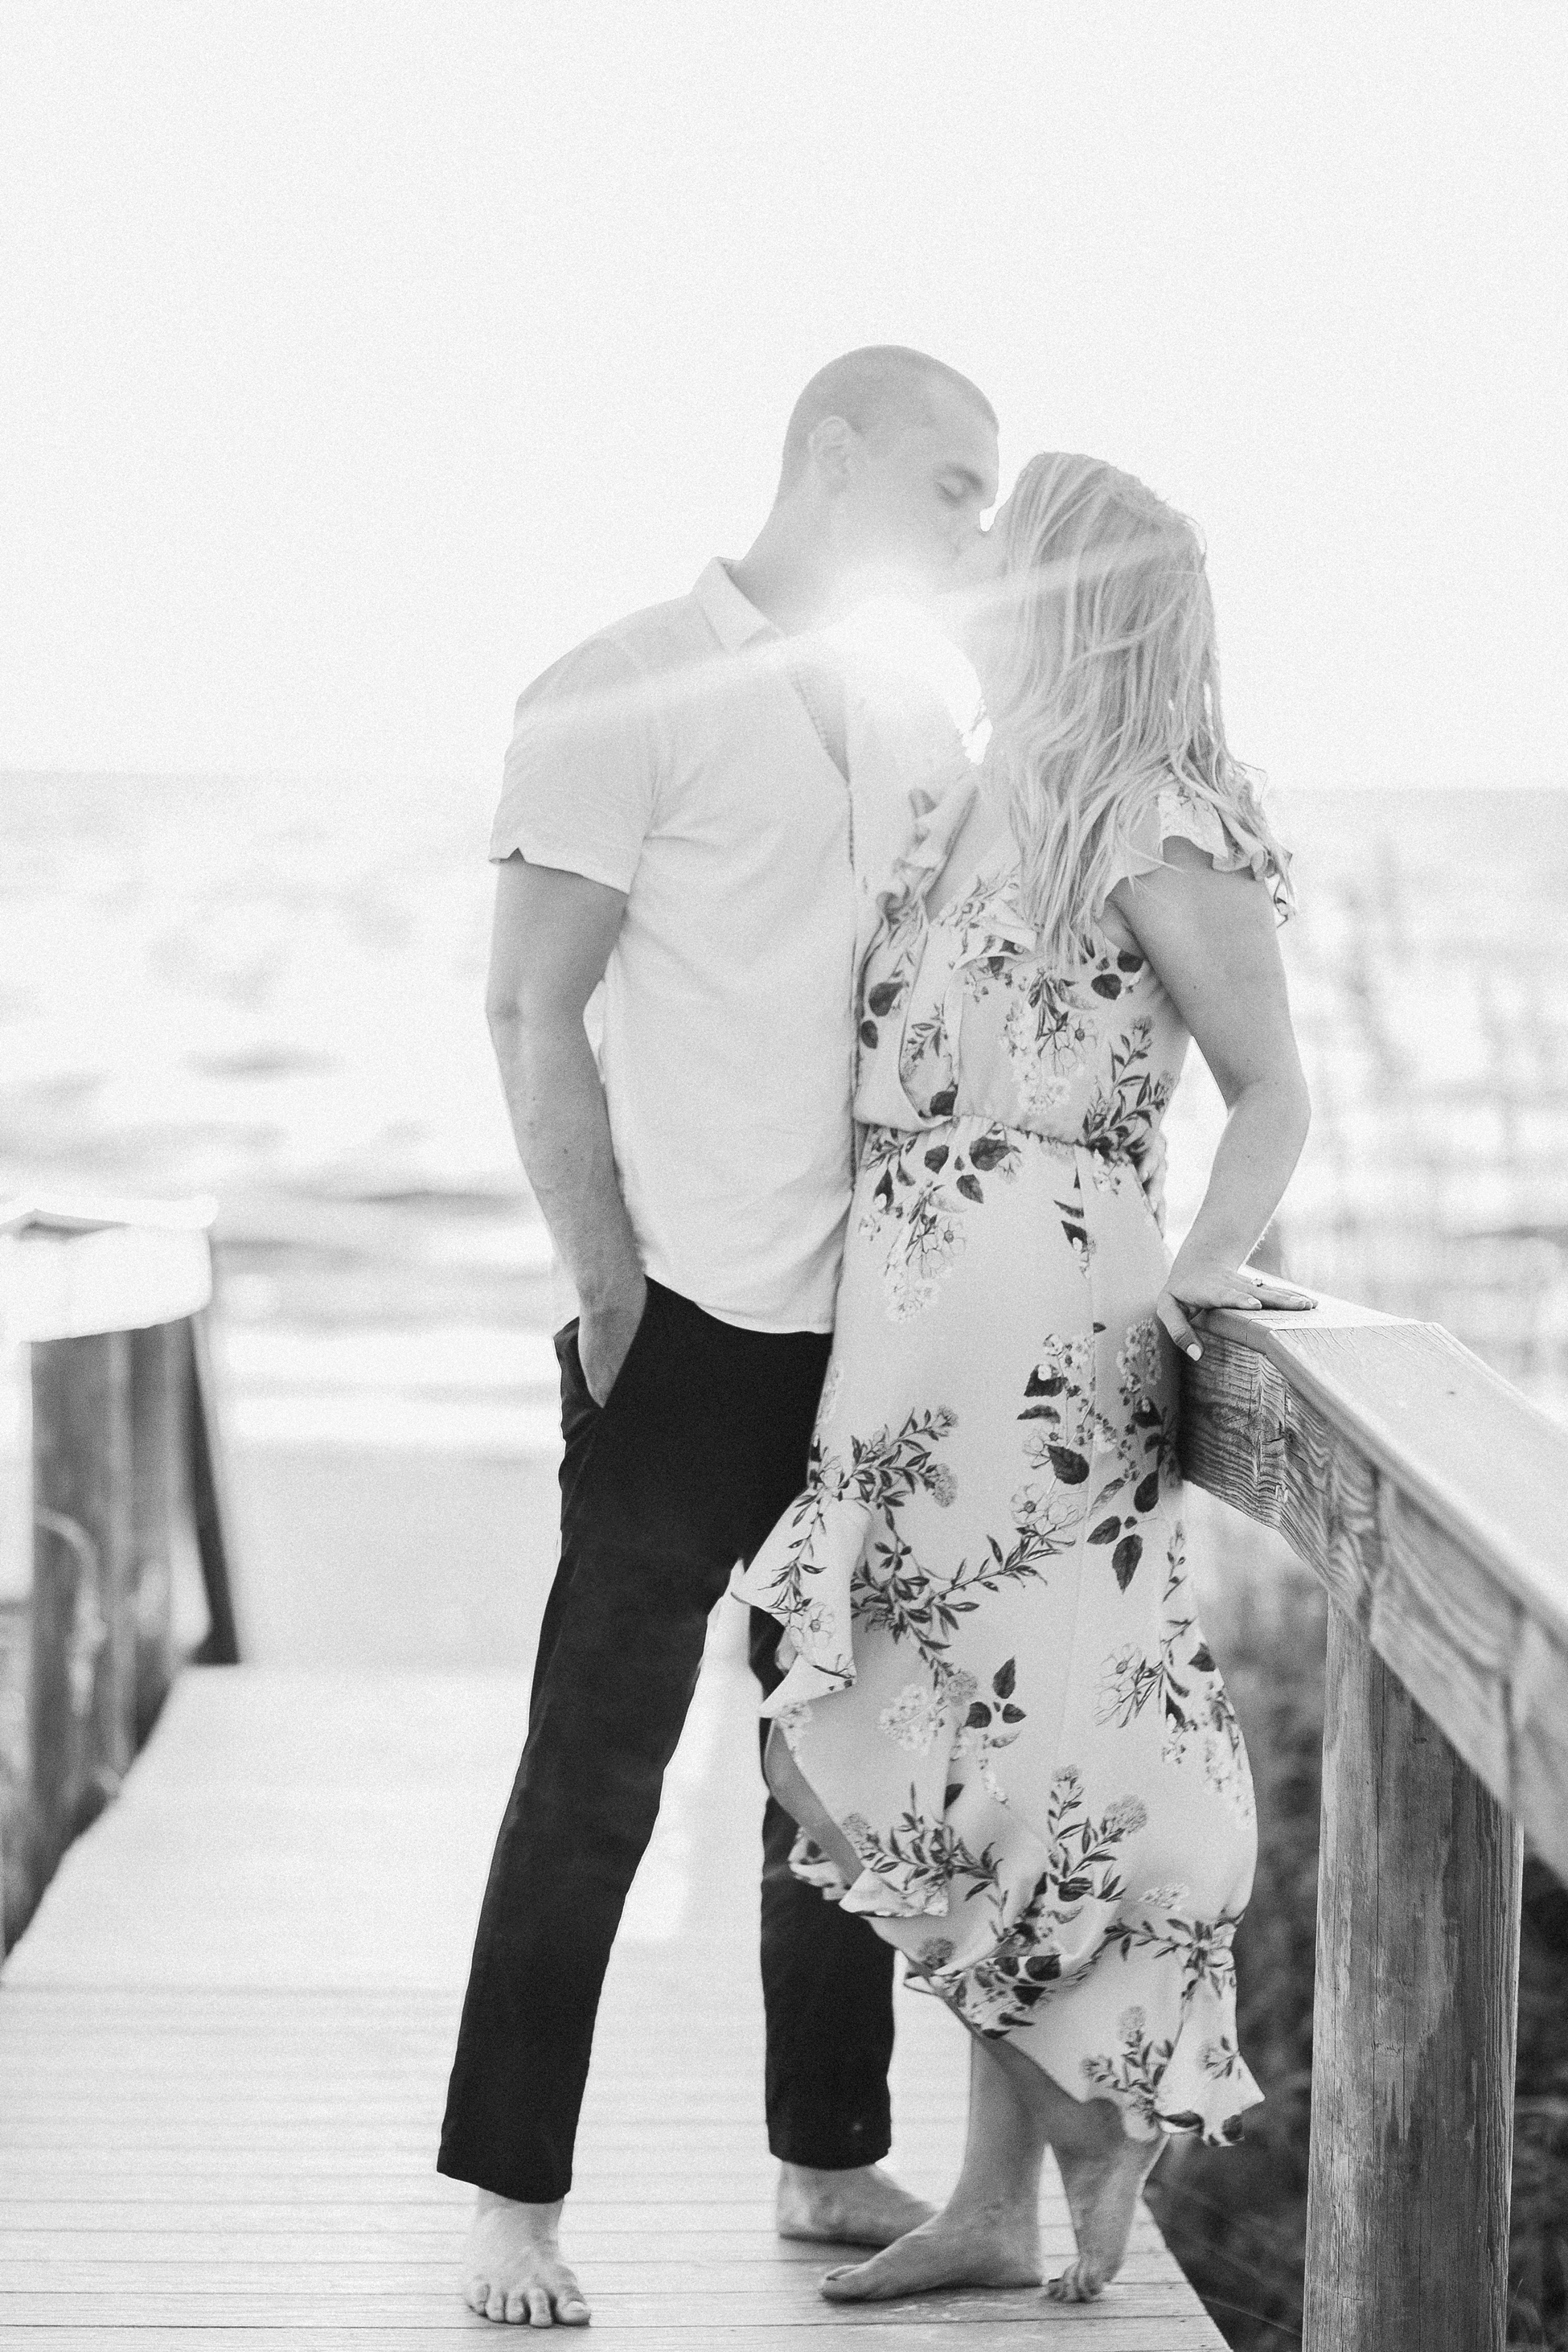 Florida Beach Engagement | © Ailyn LaTorre Photography 2018